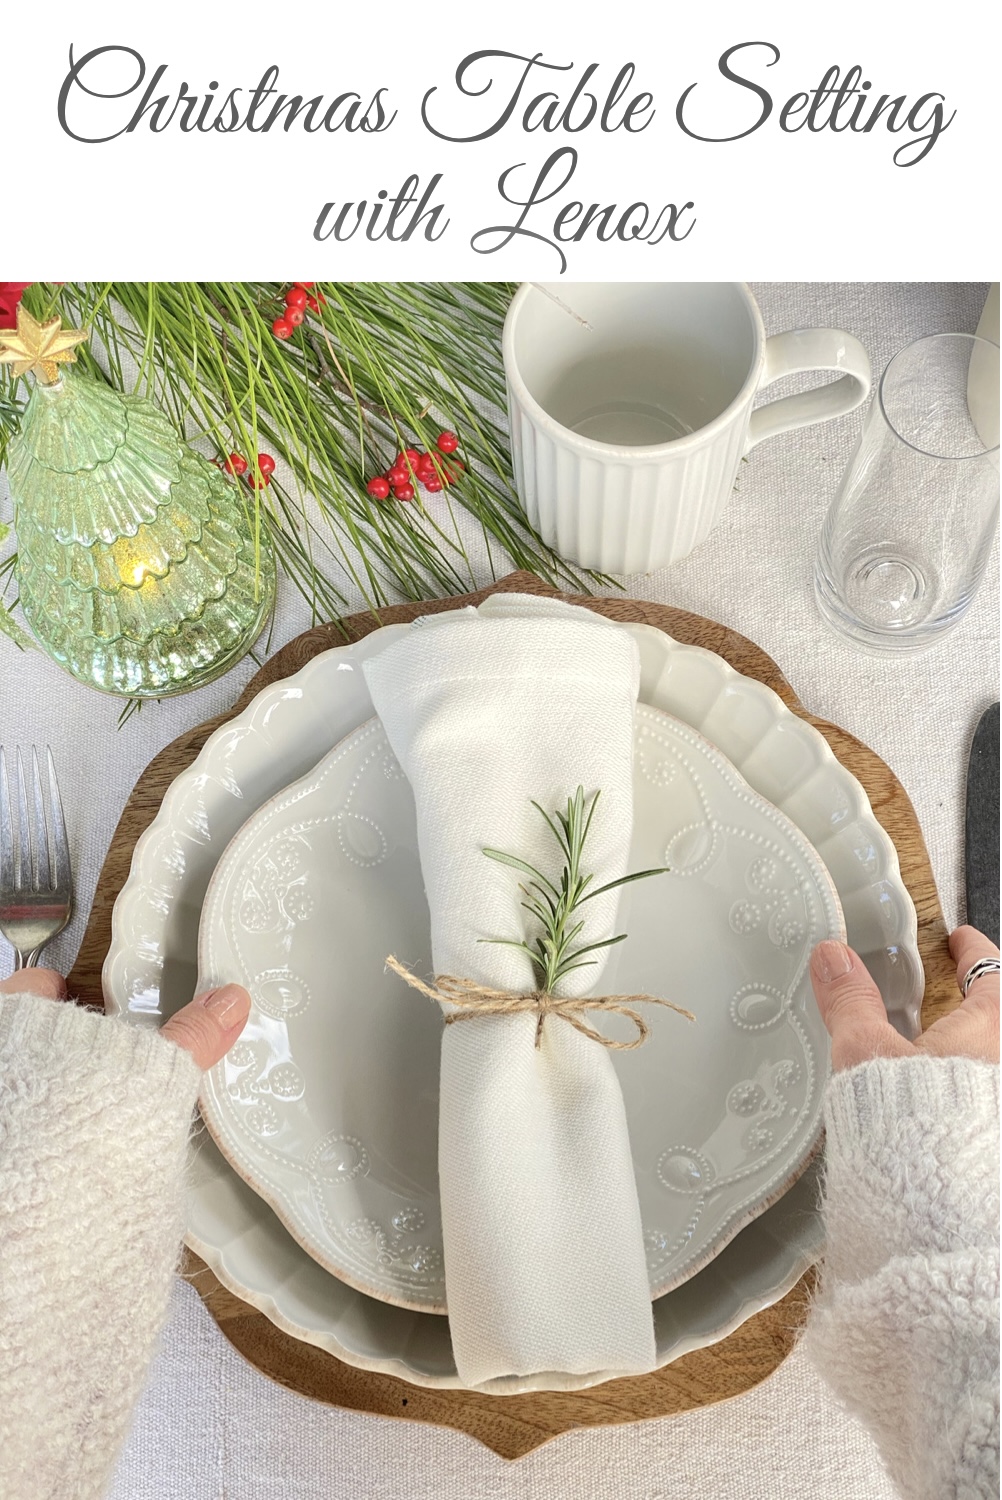 Pinterest Pin for Christmas table setting with Lenox.